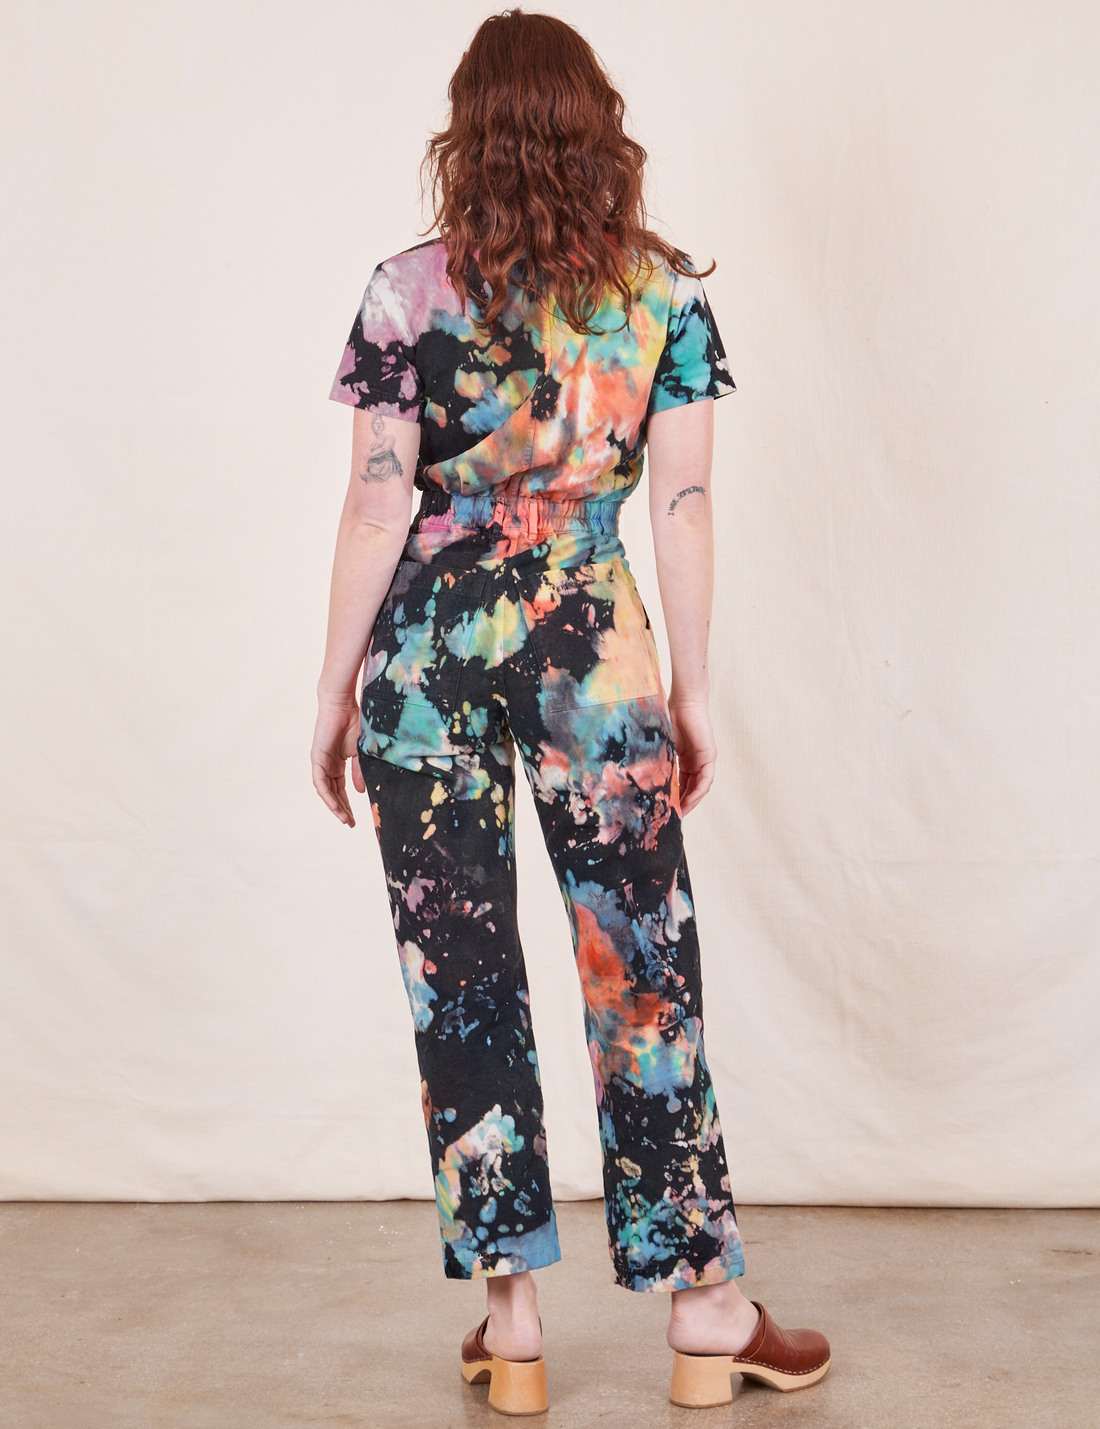 Short Sleeve Jumpsuit in Rainbow Magic Waters back view on Alex